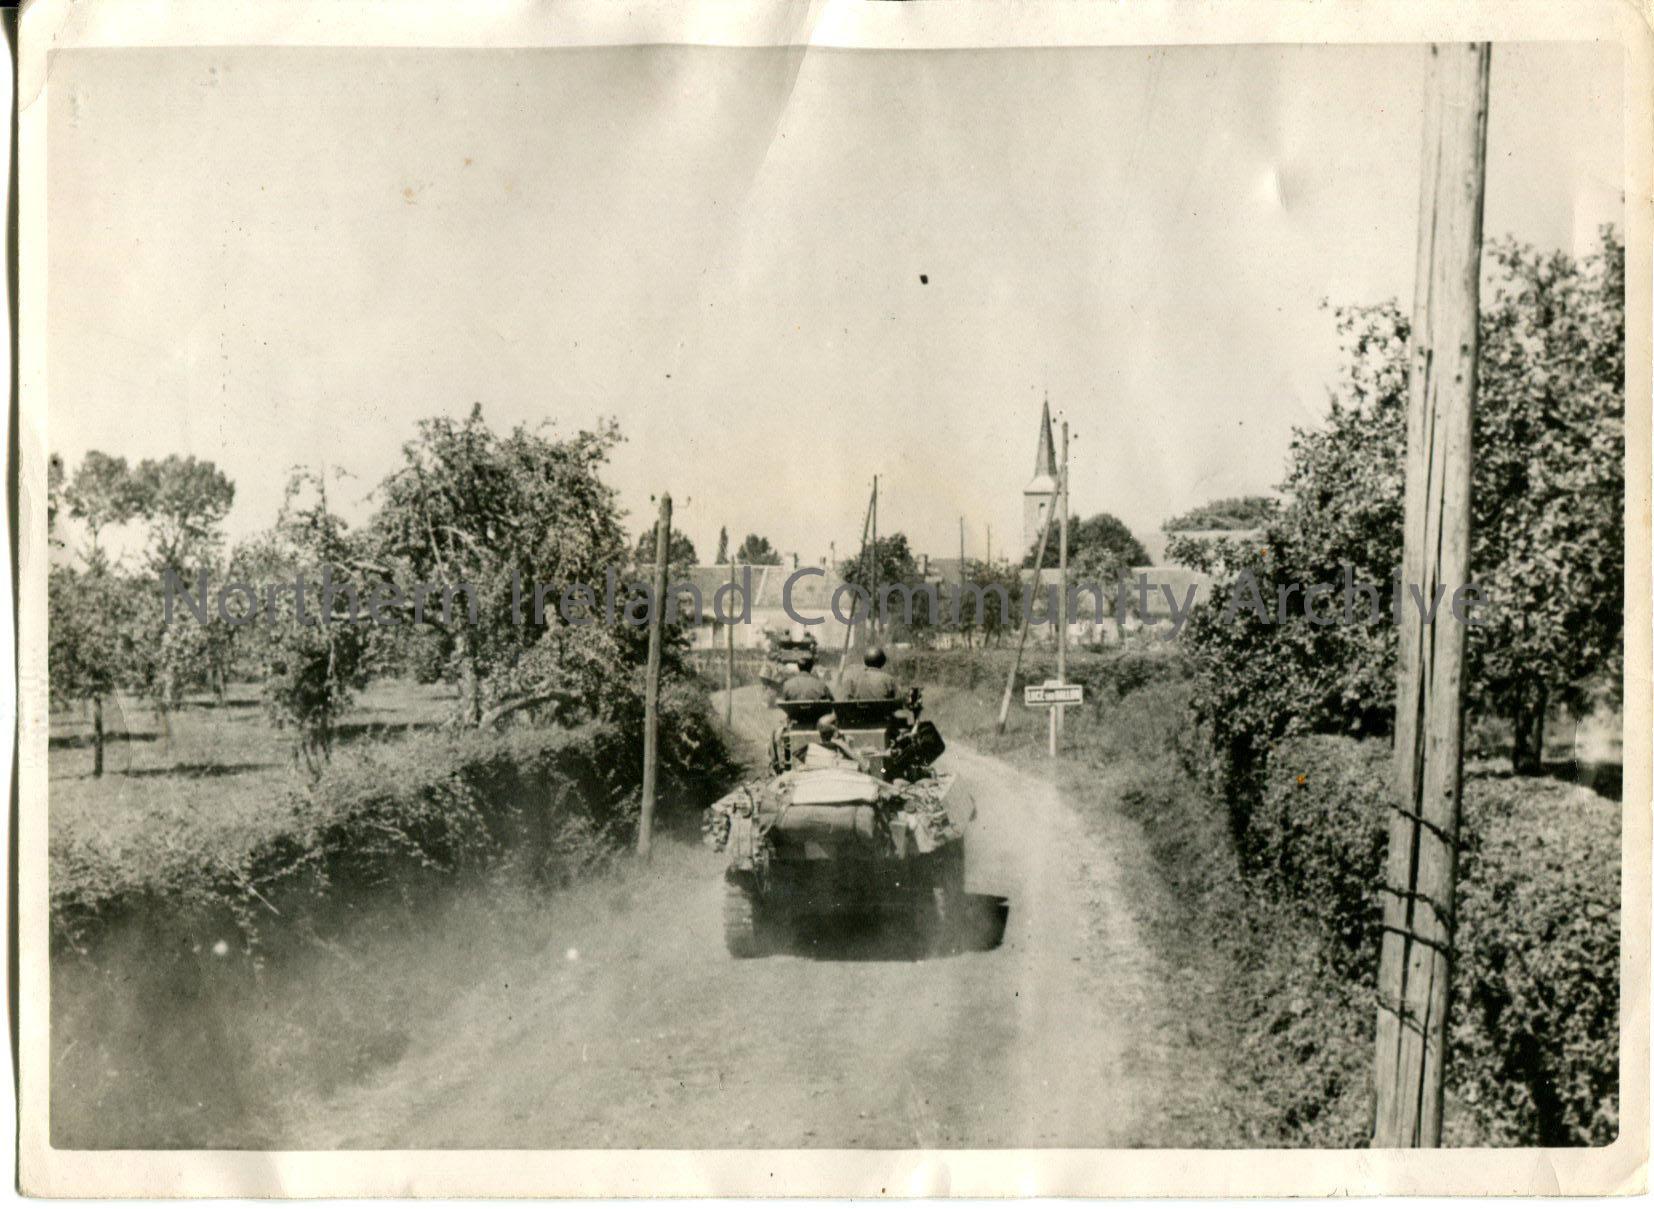 Black and white photograph of a tank with two men on board driving through the countryside towards a village with a church in the distance.